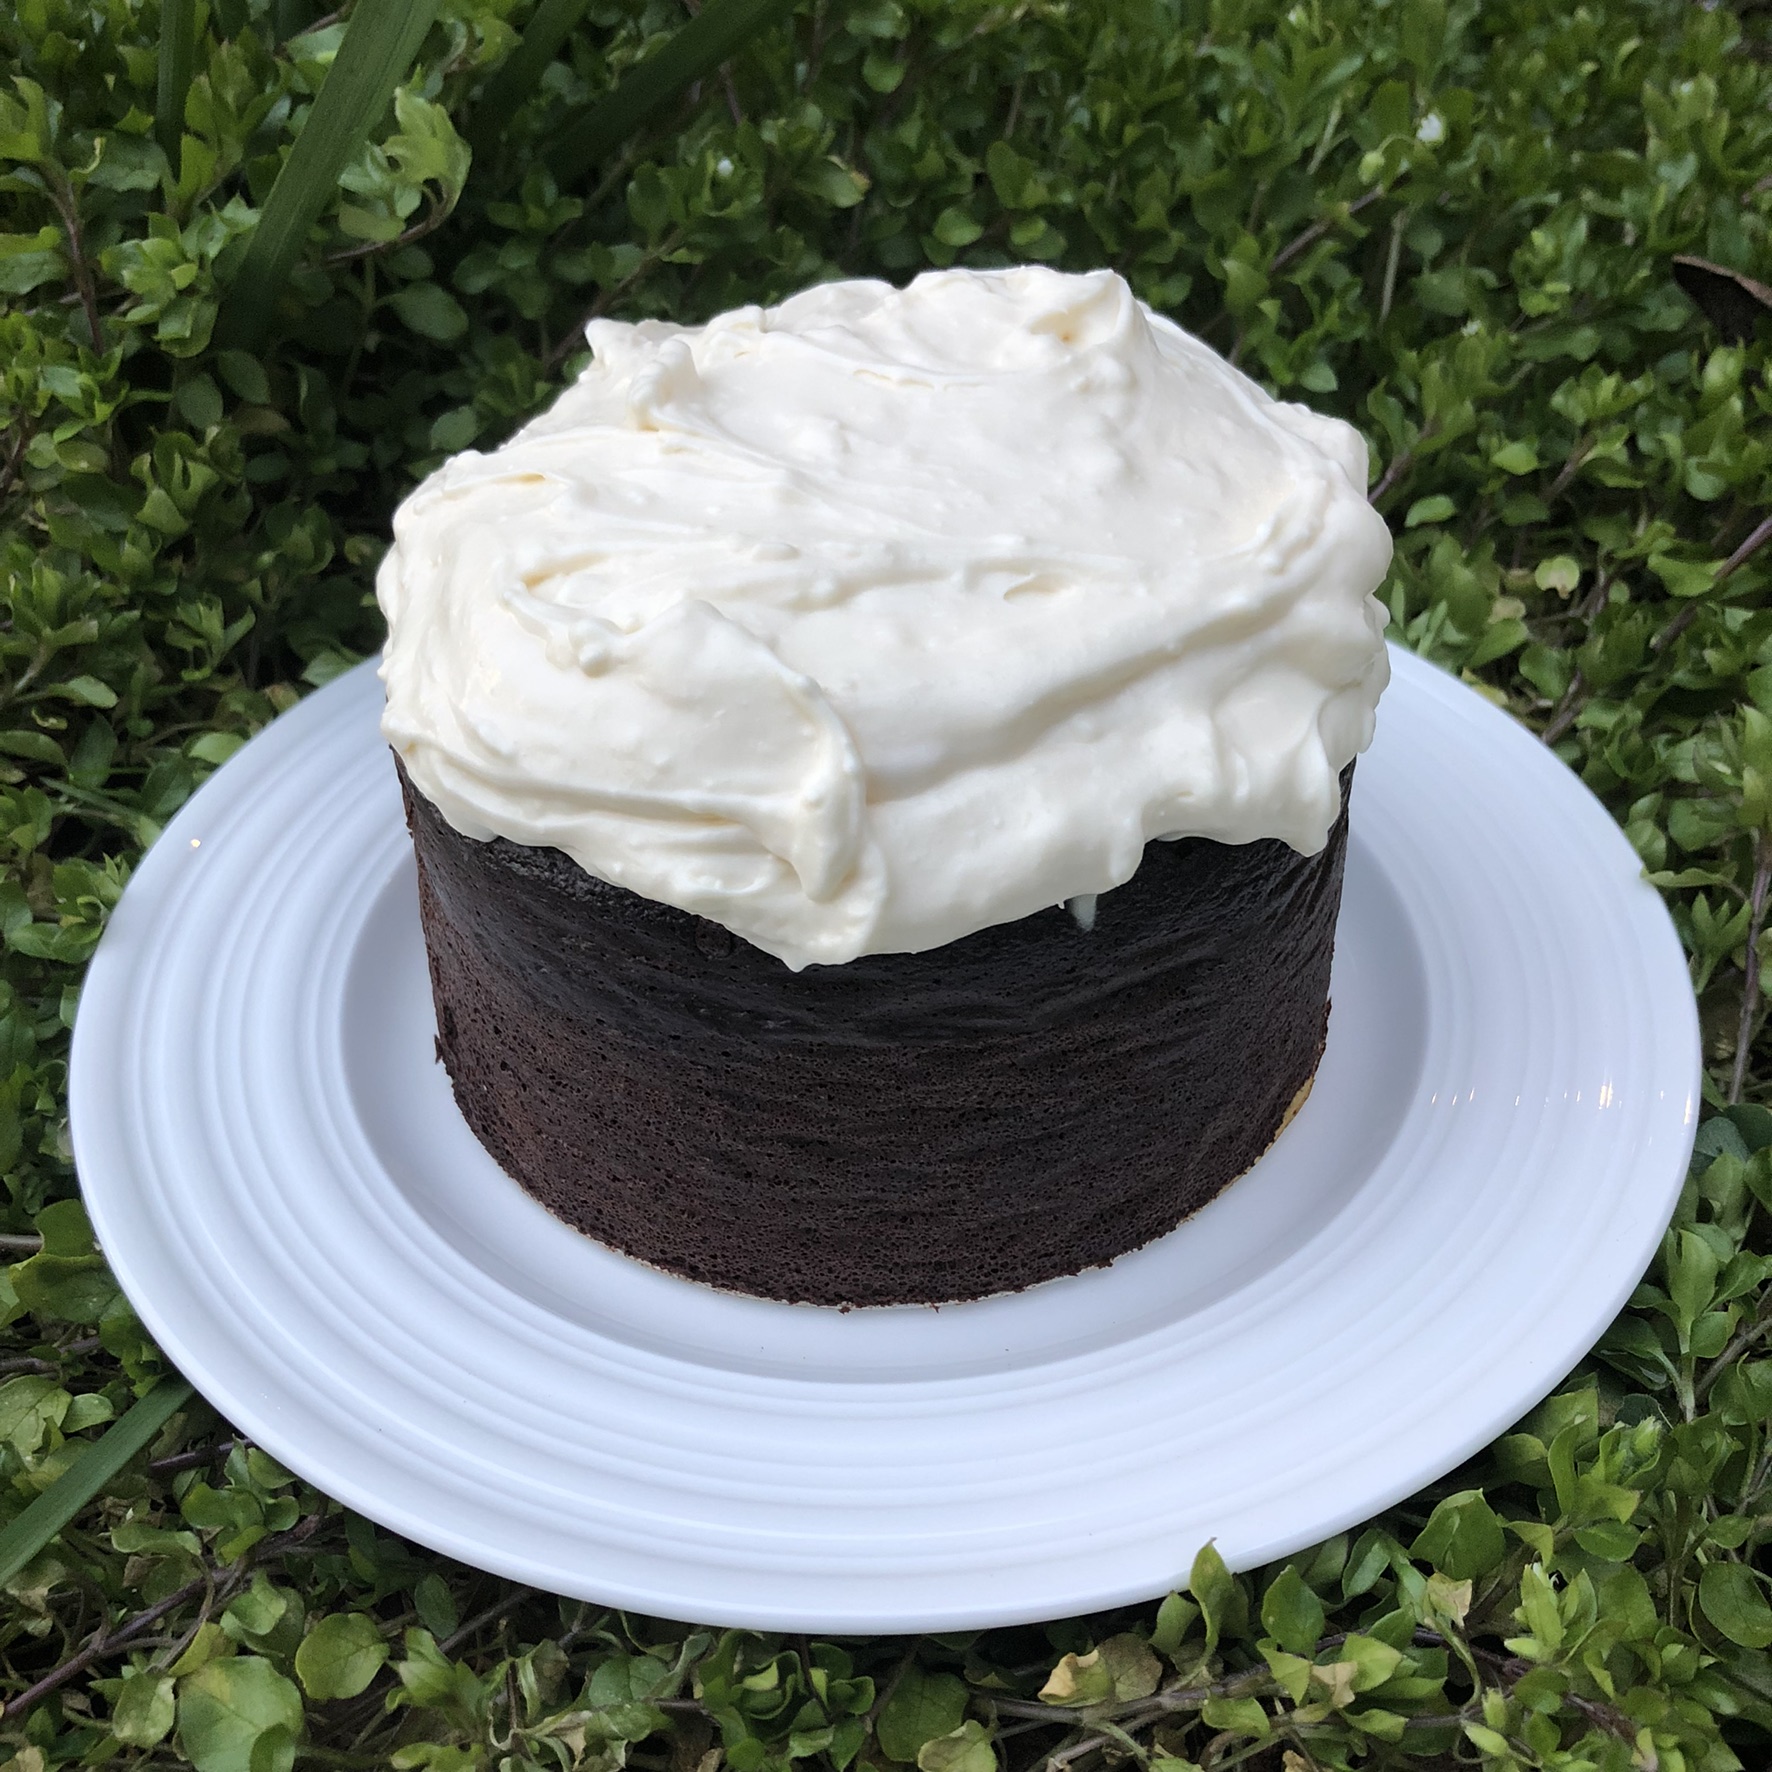 Guinness Cake for St. Patrick’s Day (grain free flours, no sugar)